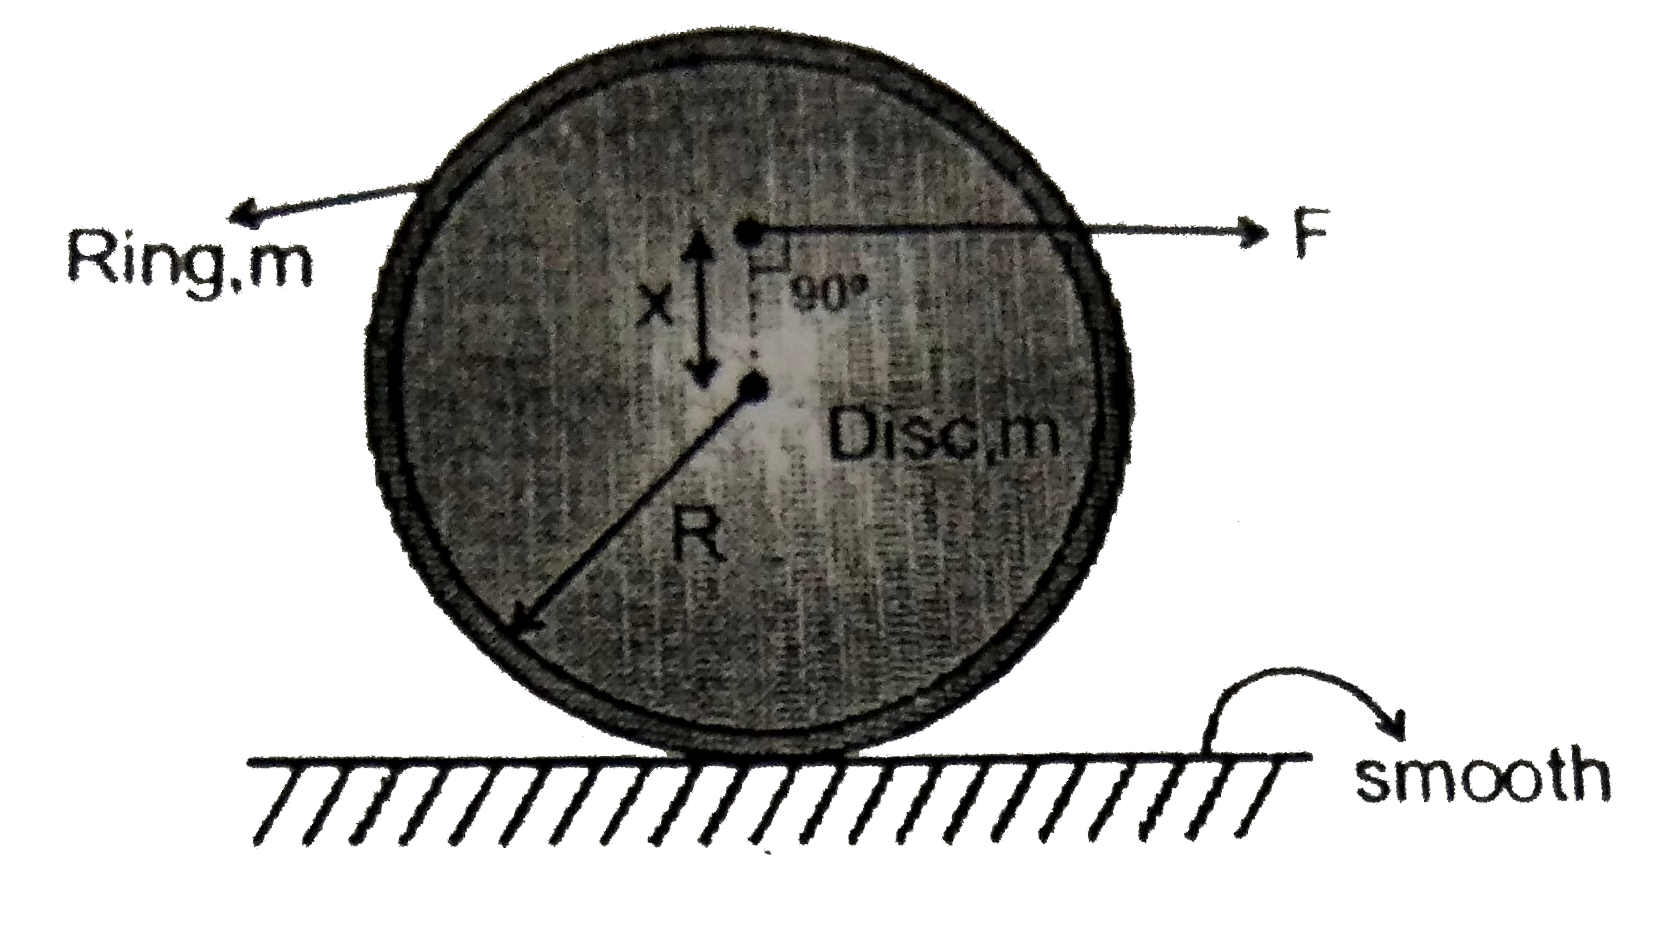 A ring and a disc of same mass m and same radius R are joinged concentrically. This system is placed on a smooth plane with the common axis parallel to the plane as shown in figure. A horizontal force F is applied on the system at a point which is at a distance x from the centre. The value of x so that it starts pure rolling is